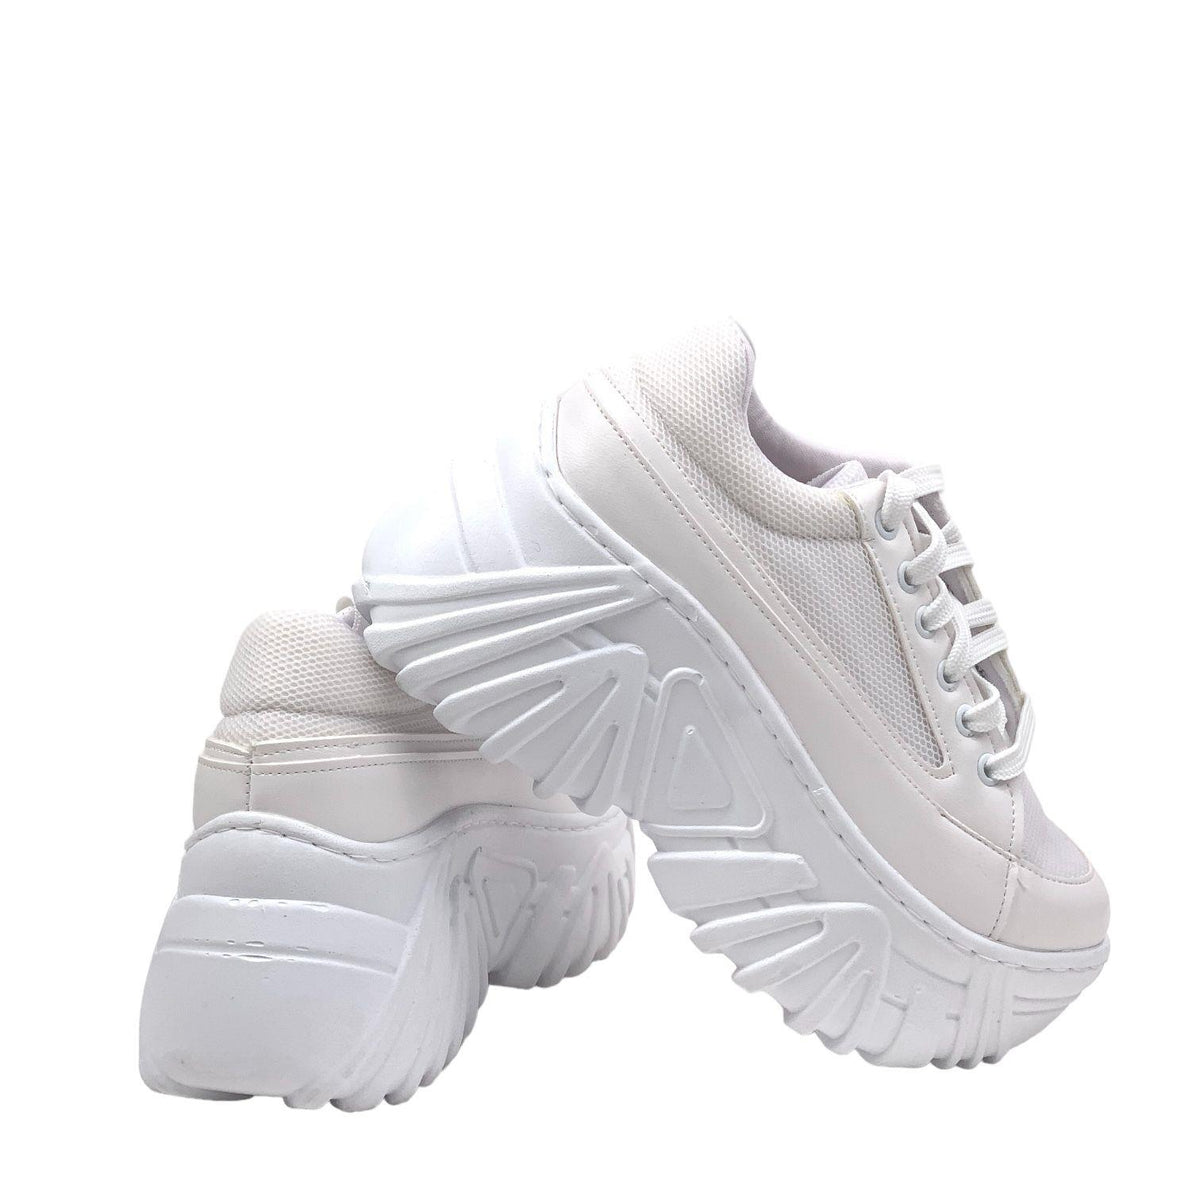 Women's shanny white high sole sneaker sports shoes - STREETMODE™